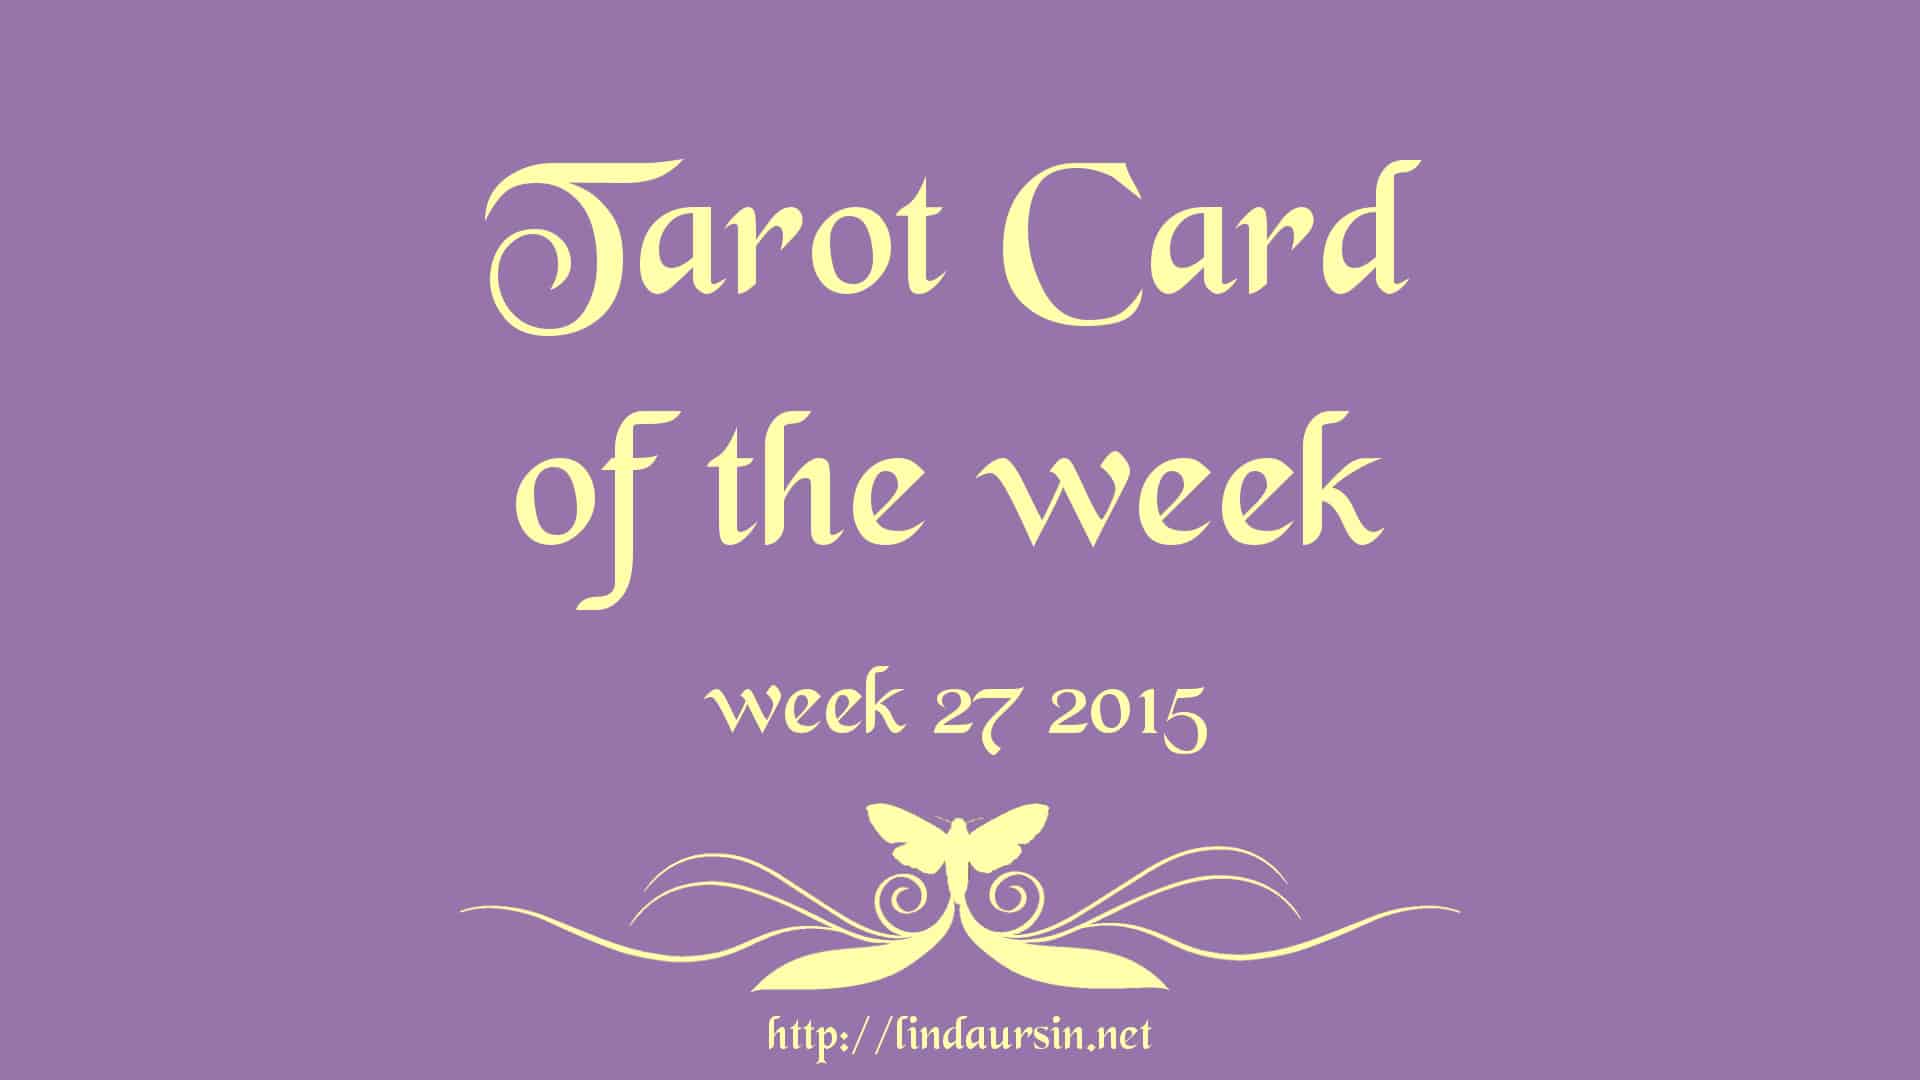 Your Tarot card for week 27 2015